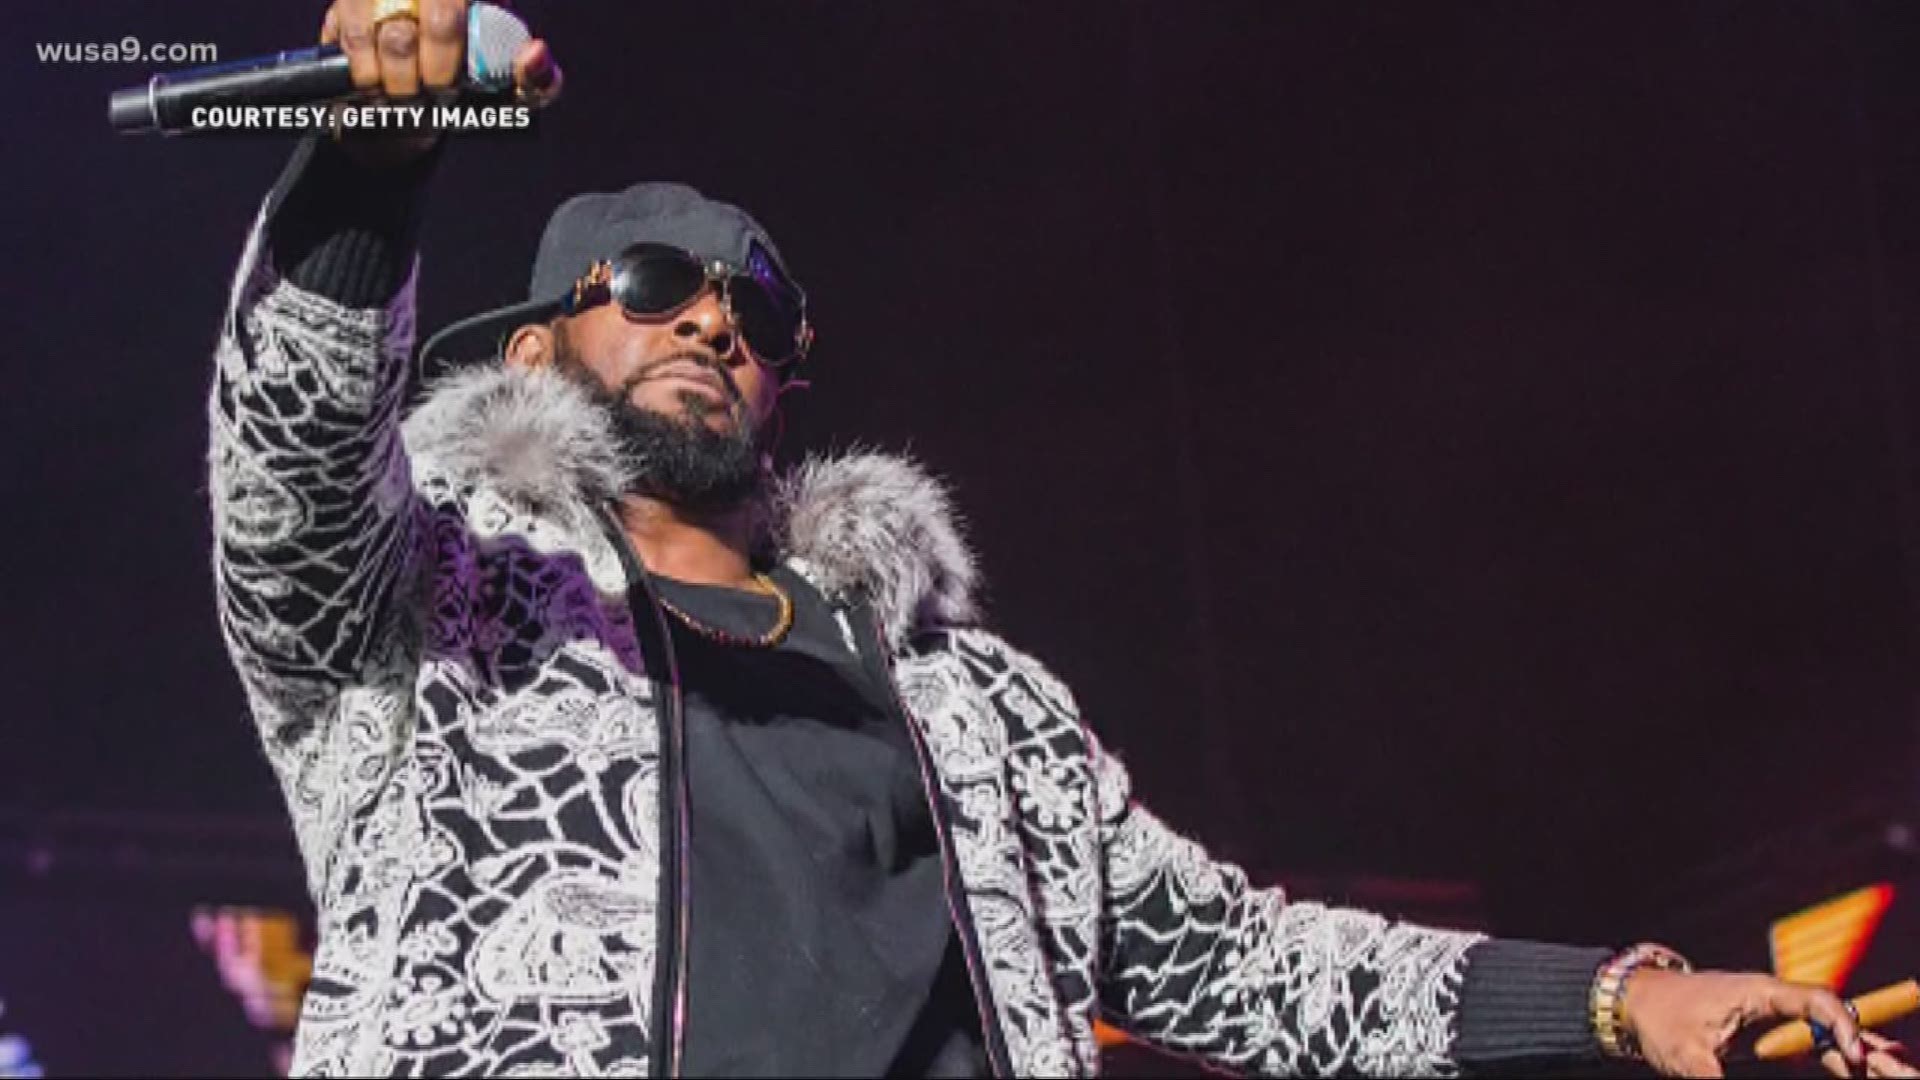 The TV documentary series “Surviving R Kelly” laid out a history of abuse and sexual assault allegations against R&B Singer R Kelly.